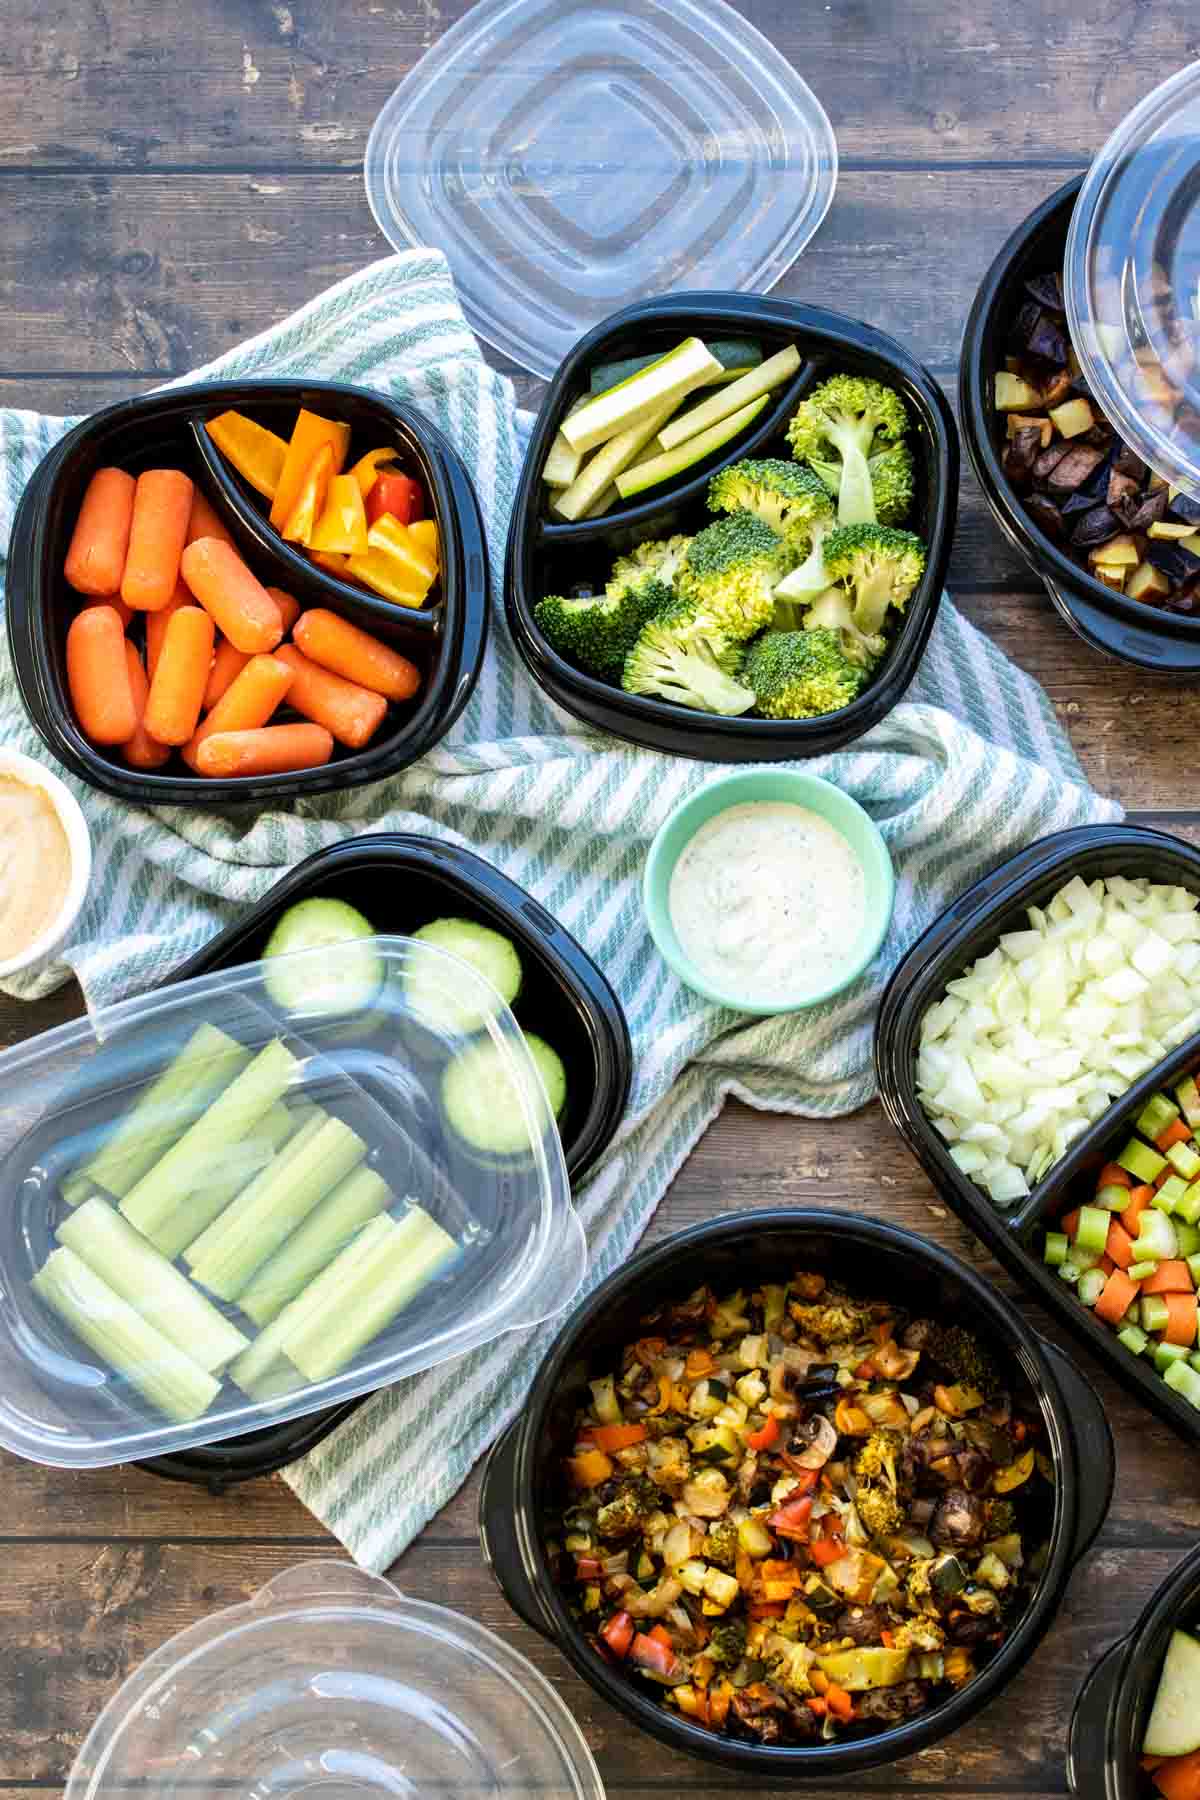 A wooden surface with a blue striped towel and black containers filled with fresh and roasted veggies in them.